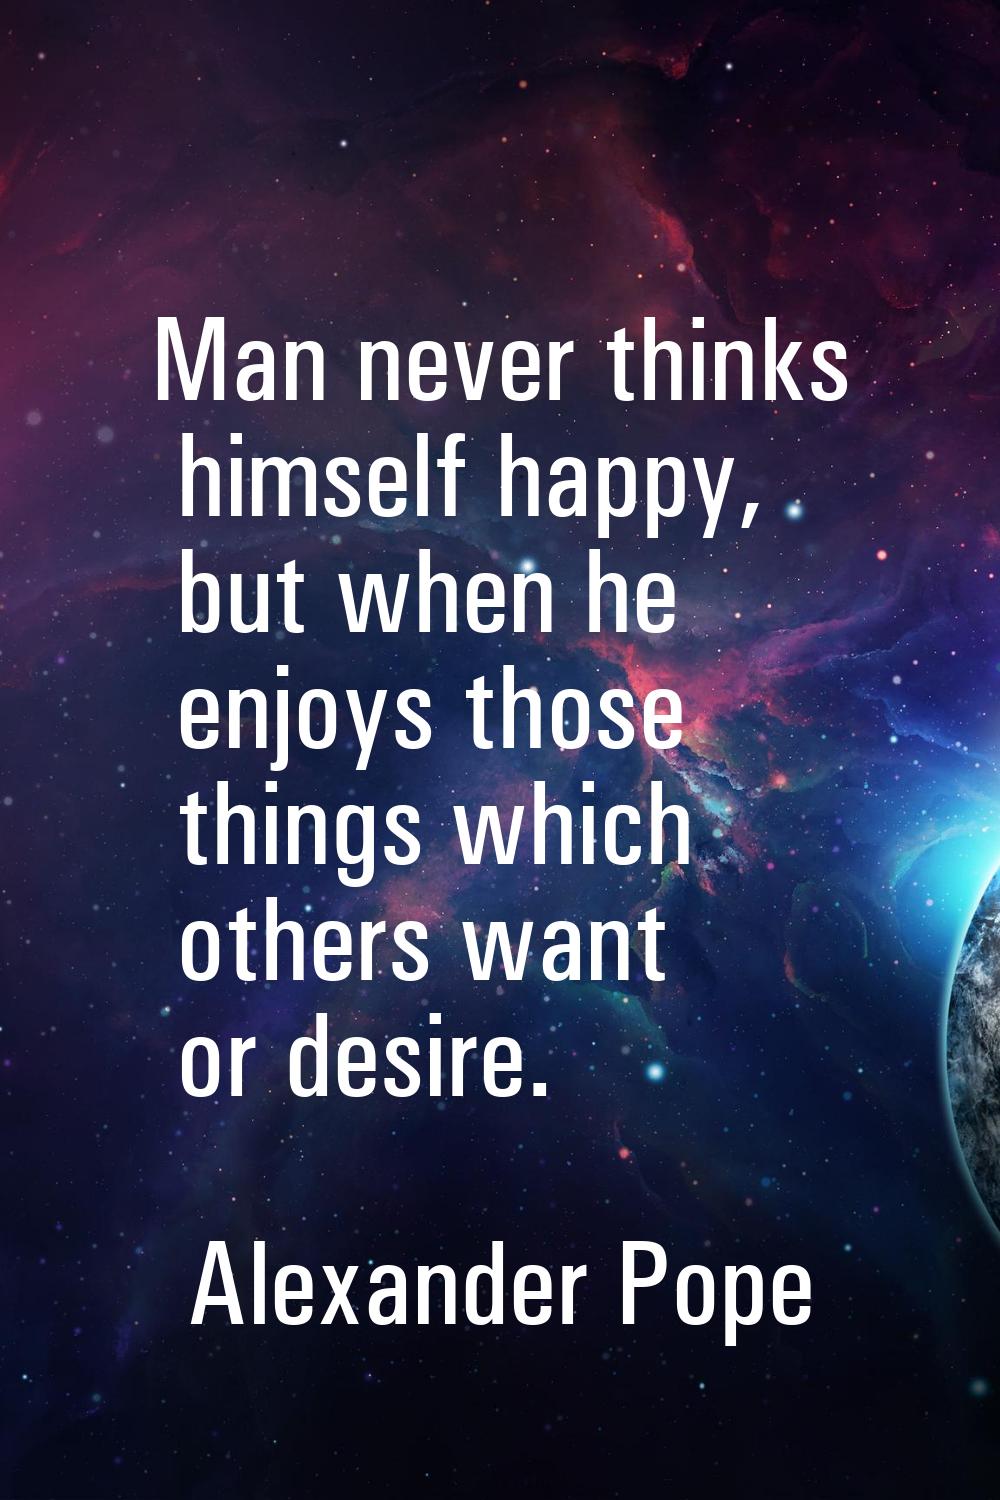 Man never thinks himself happy, but when he enjoys those things which others want or desire.